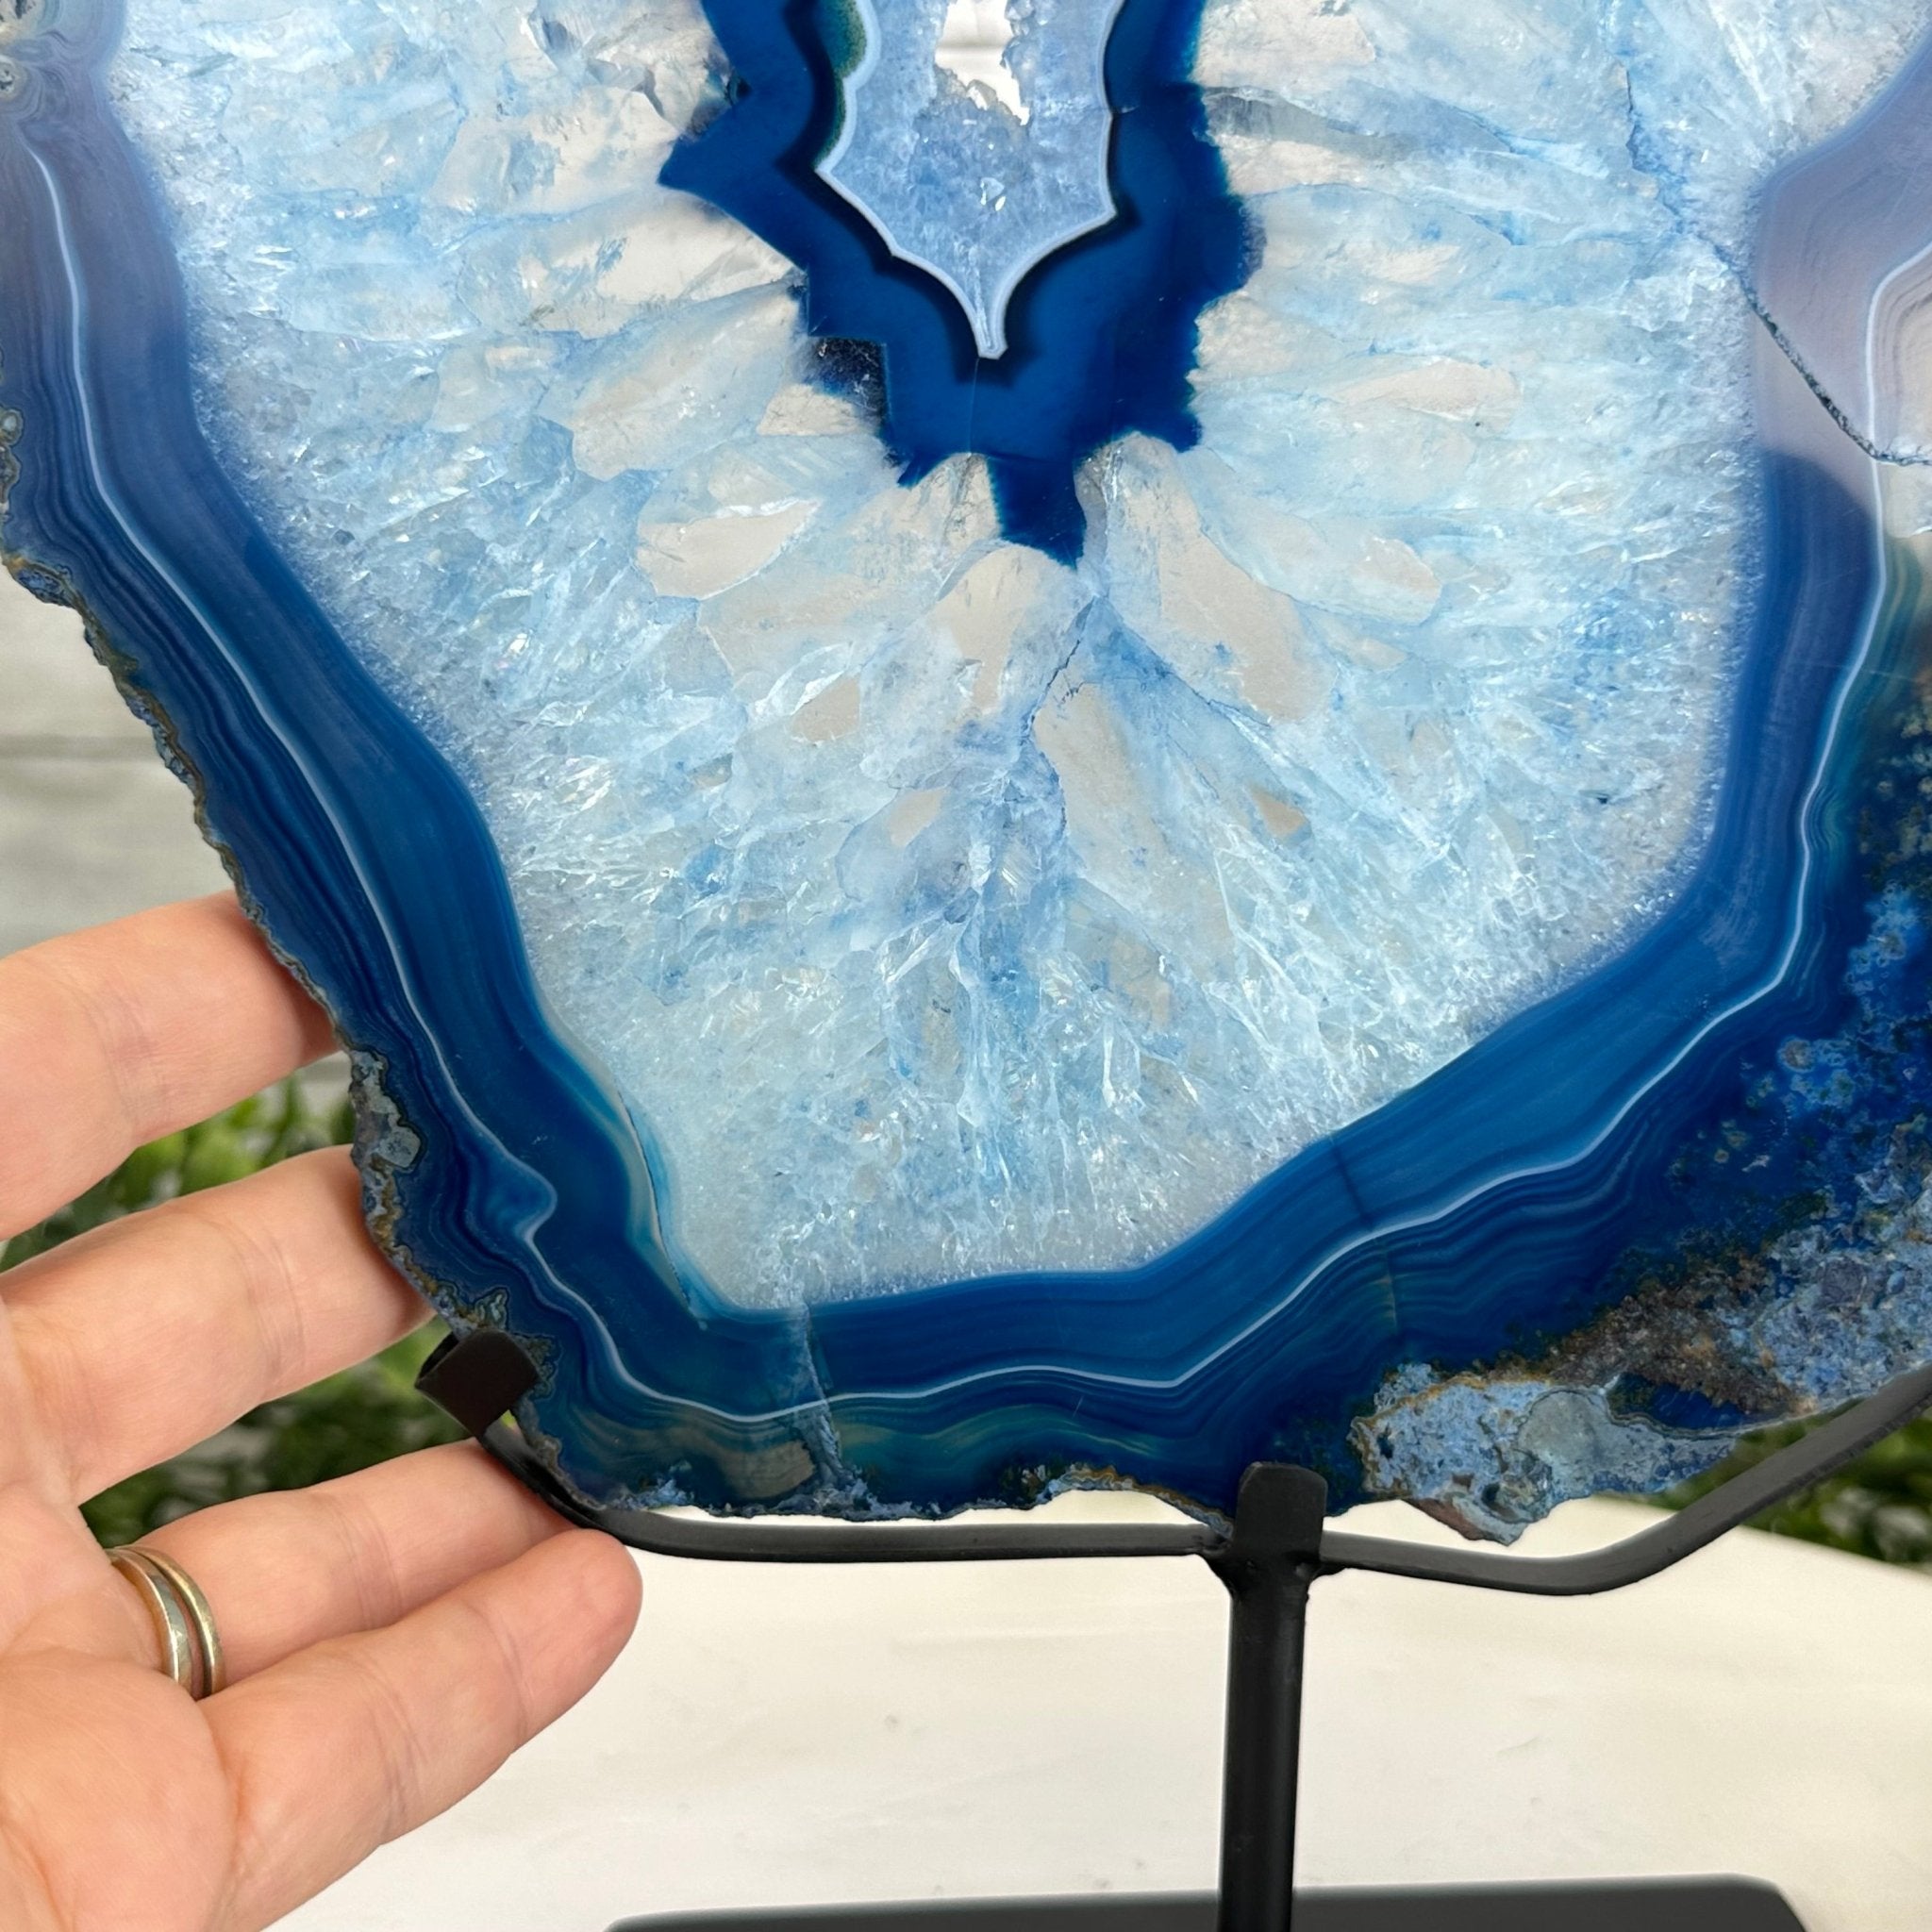 Brazilian Blue Agate Slice on a Metal Stand, 13.3" Tall Model #5055-0159 - Brazil GemsBrazil GemsBrazilian Blue Agate Slice on a Metal Stand, 13.3" Tall Model #5055-0159Slices on Fixed Bases5055-0159